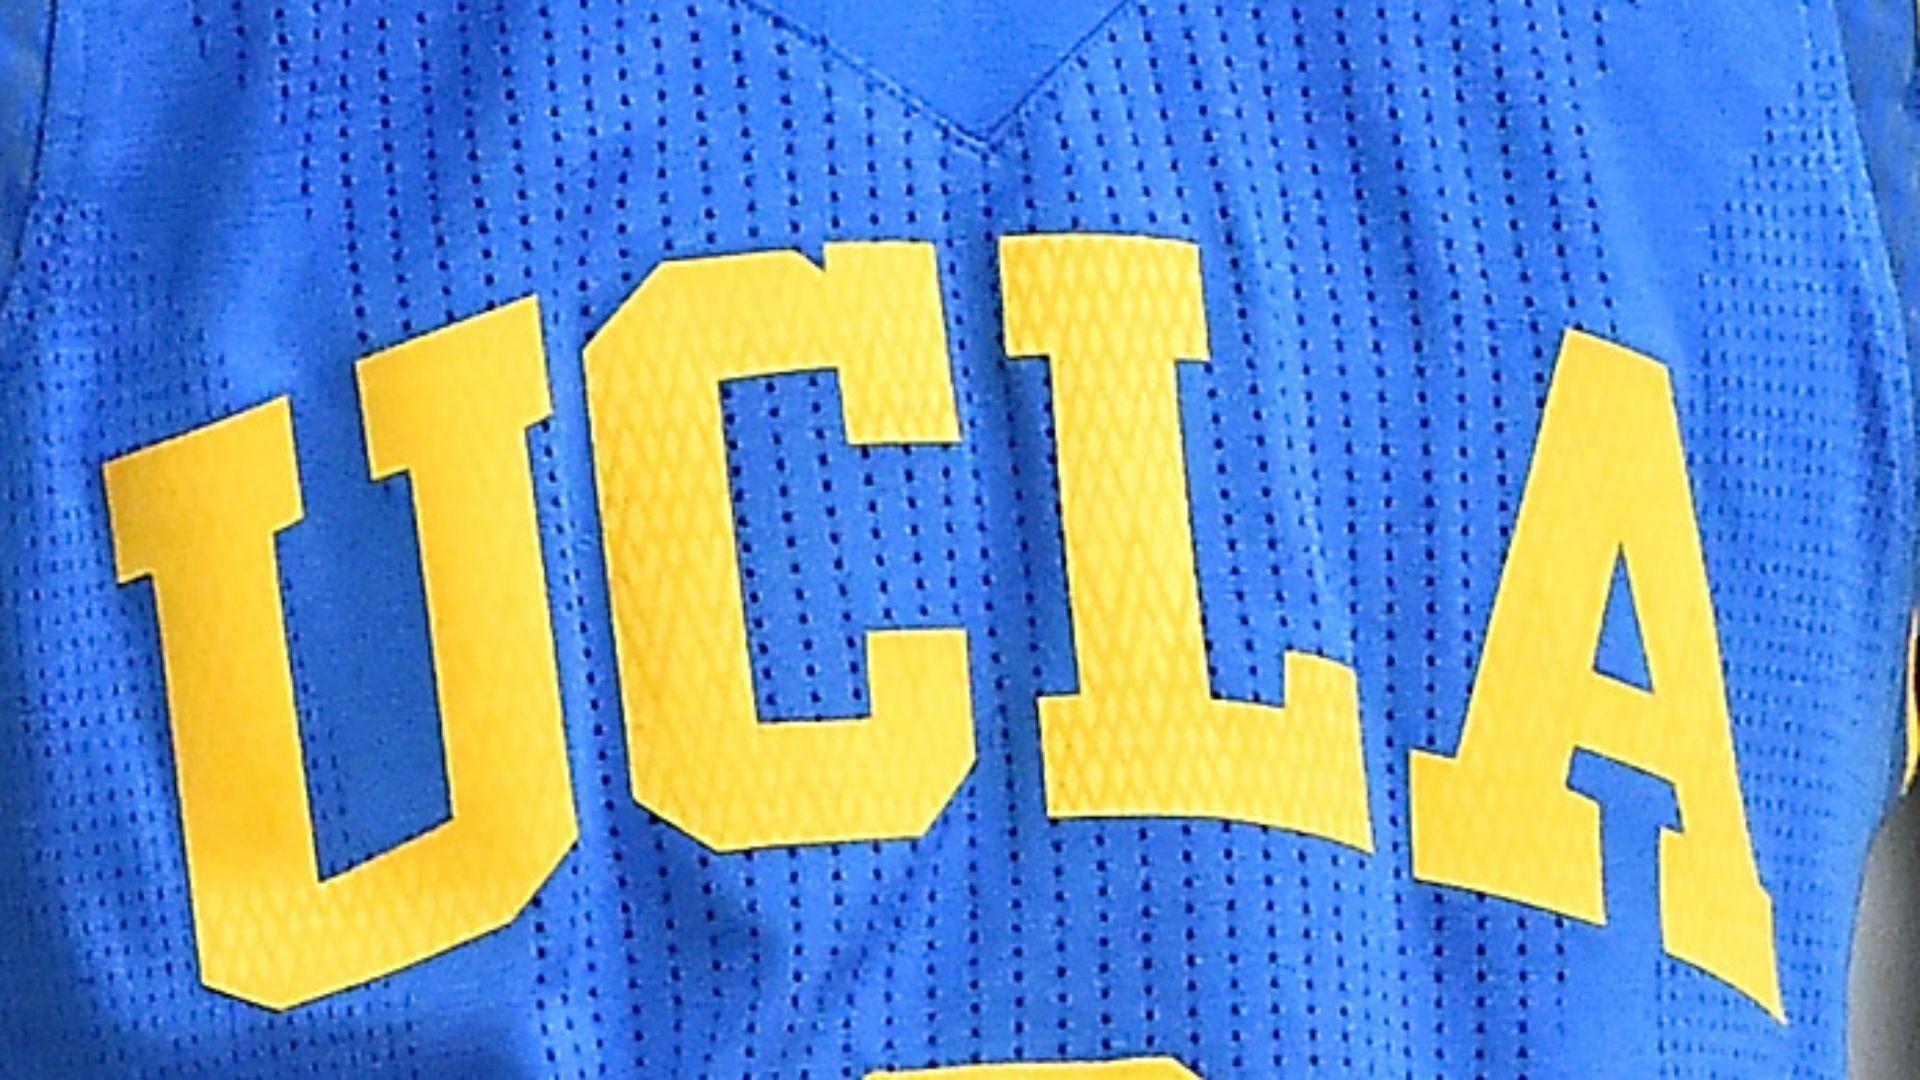 How will UCLA trio be punished? It's complicated. NCAA Basketball